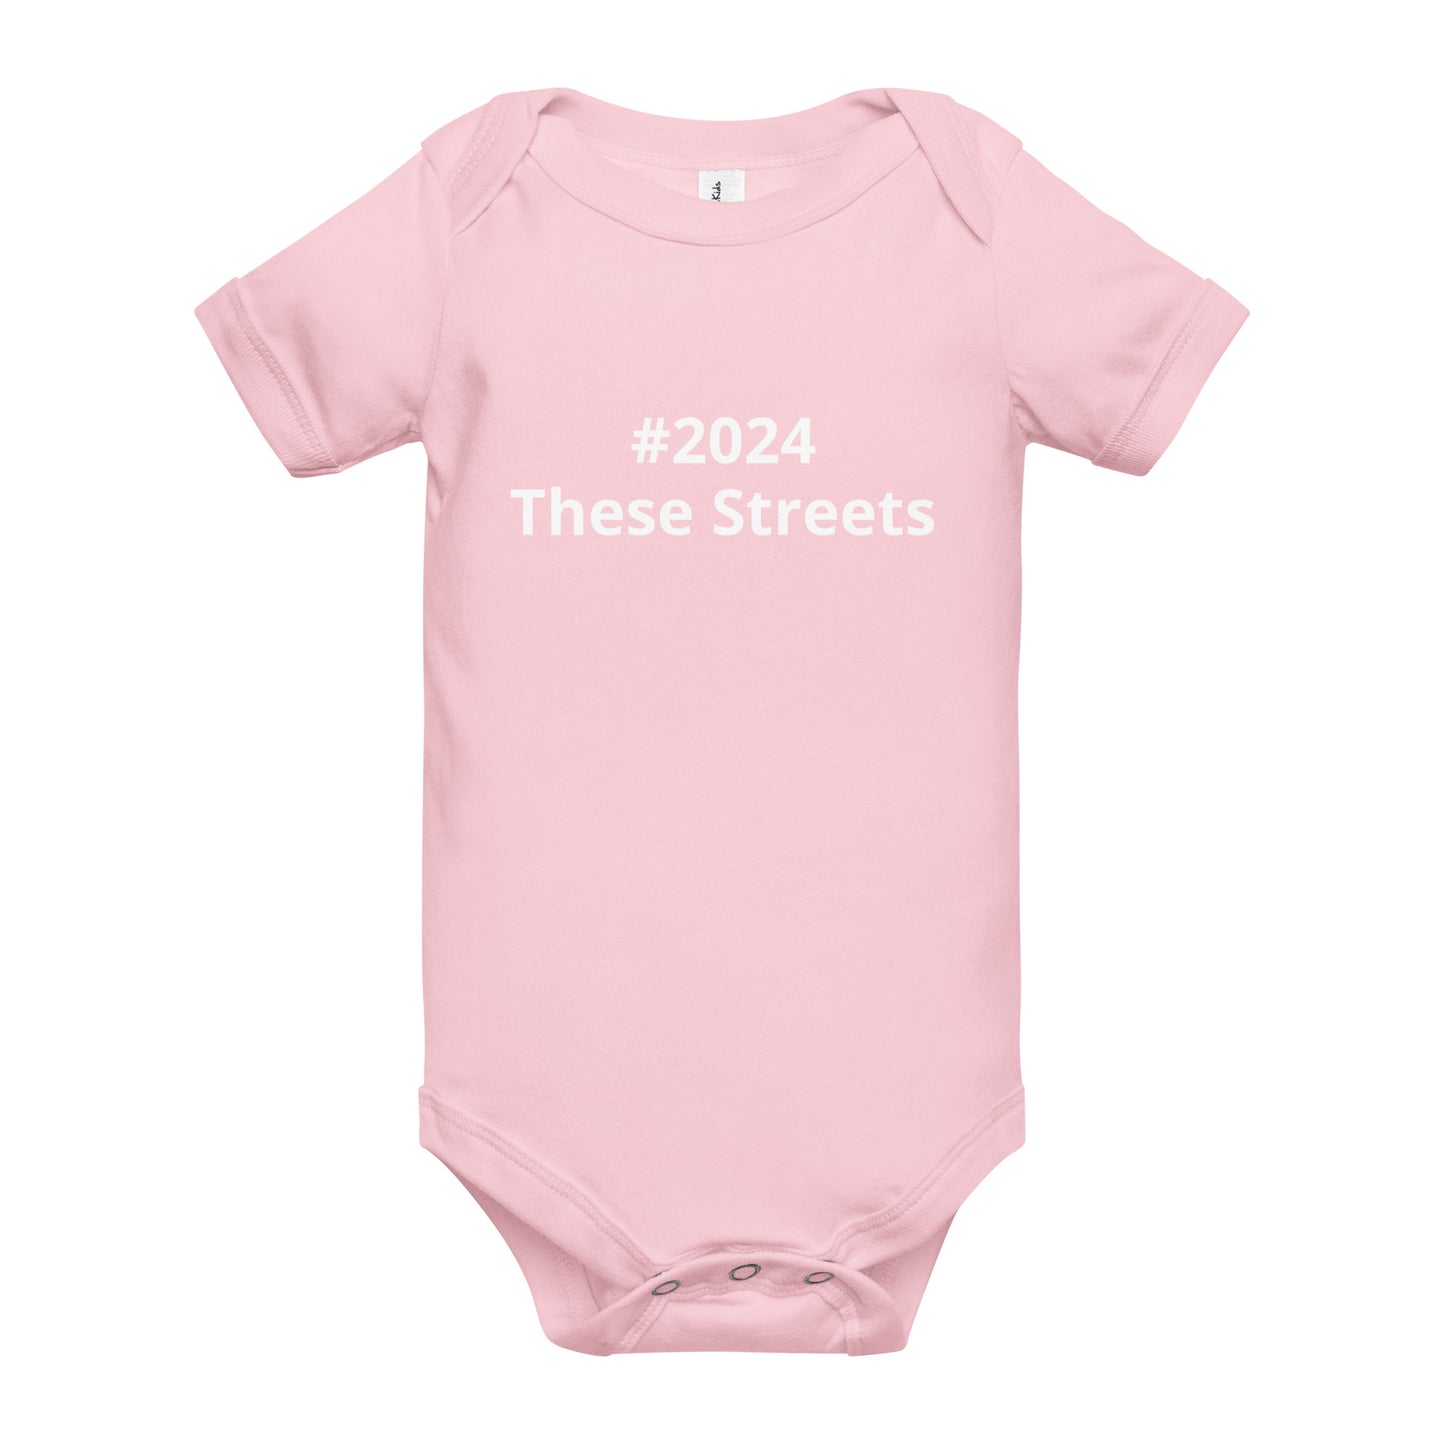 For these streets funny onesie for baby